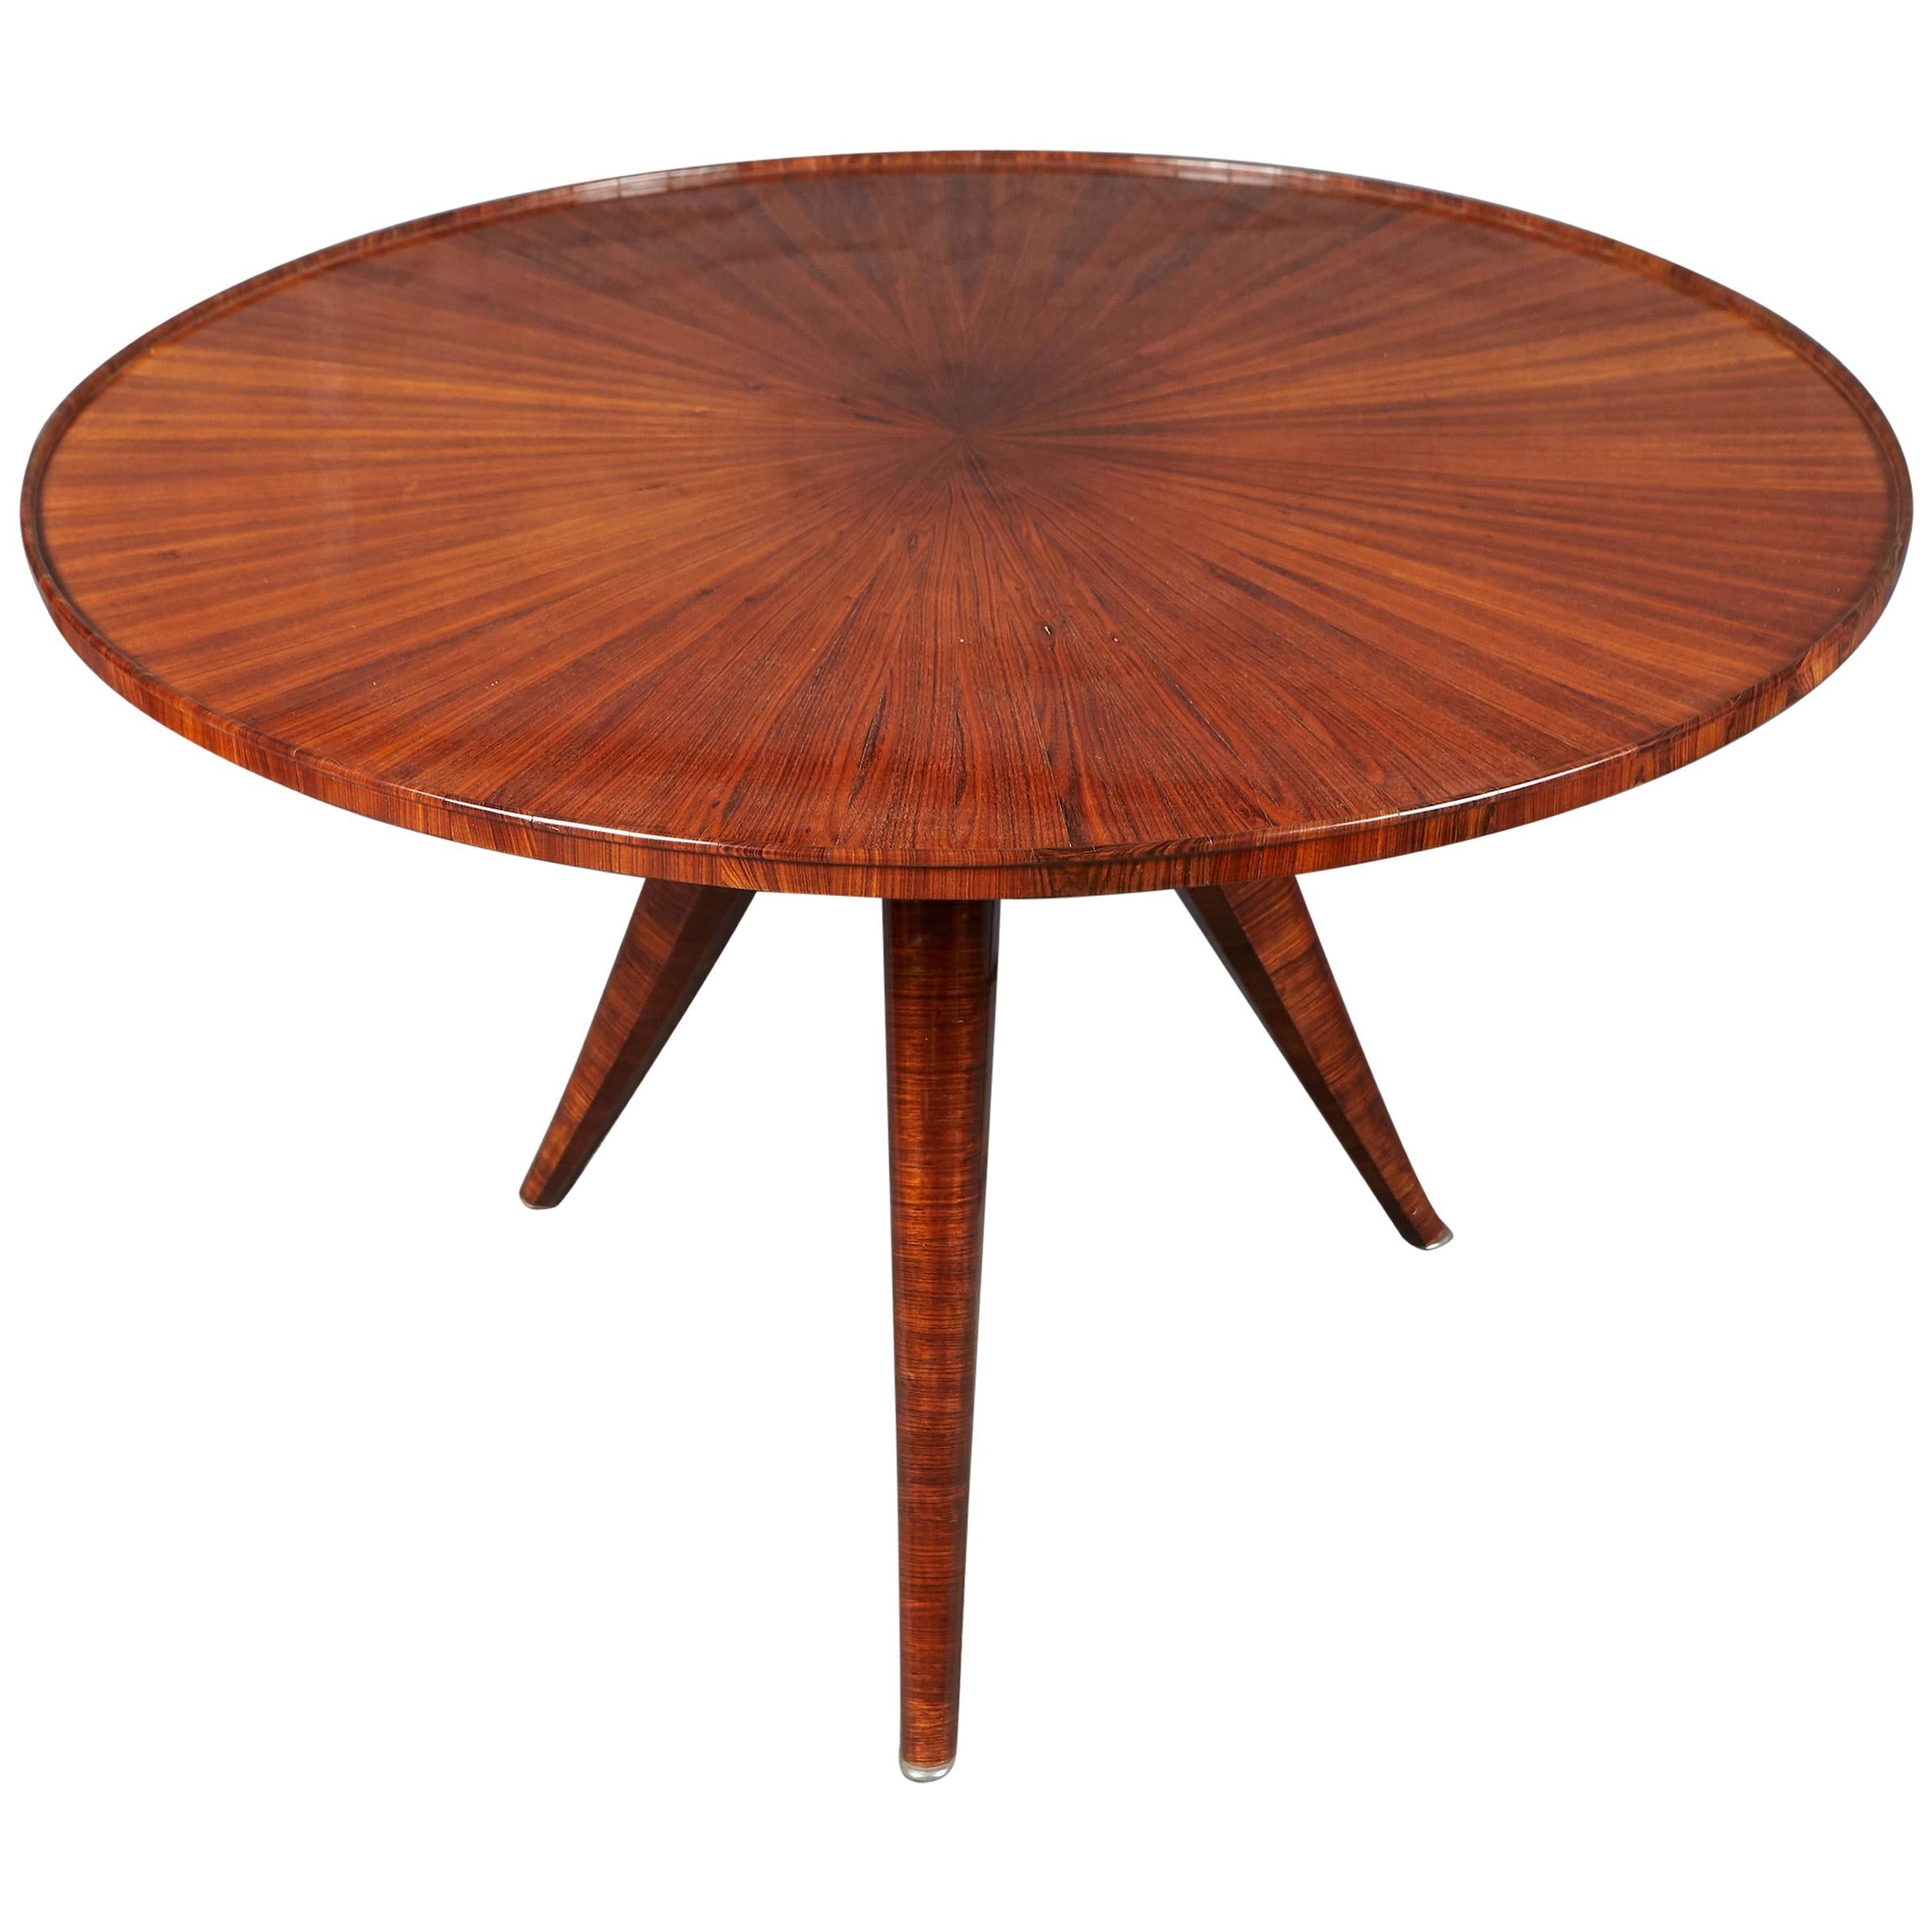 Stunning Art Deco circular side table with beautiful radial marquetry design, resting tripod base with silvered bronze hoofs by Etienne Kohlmann signed 